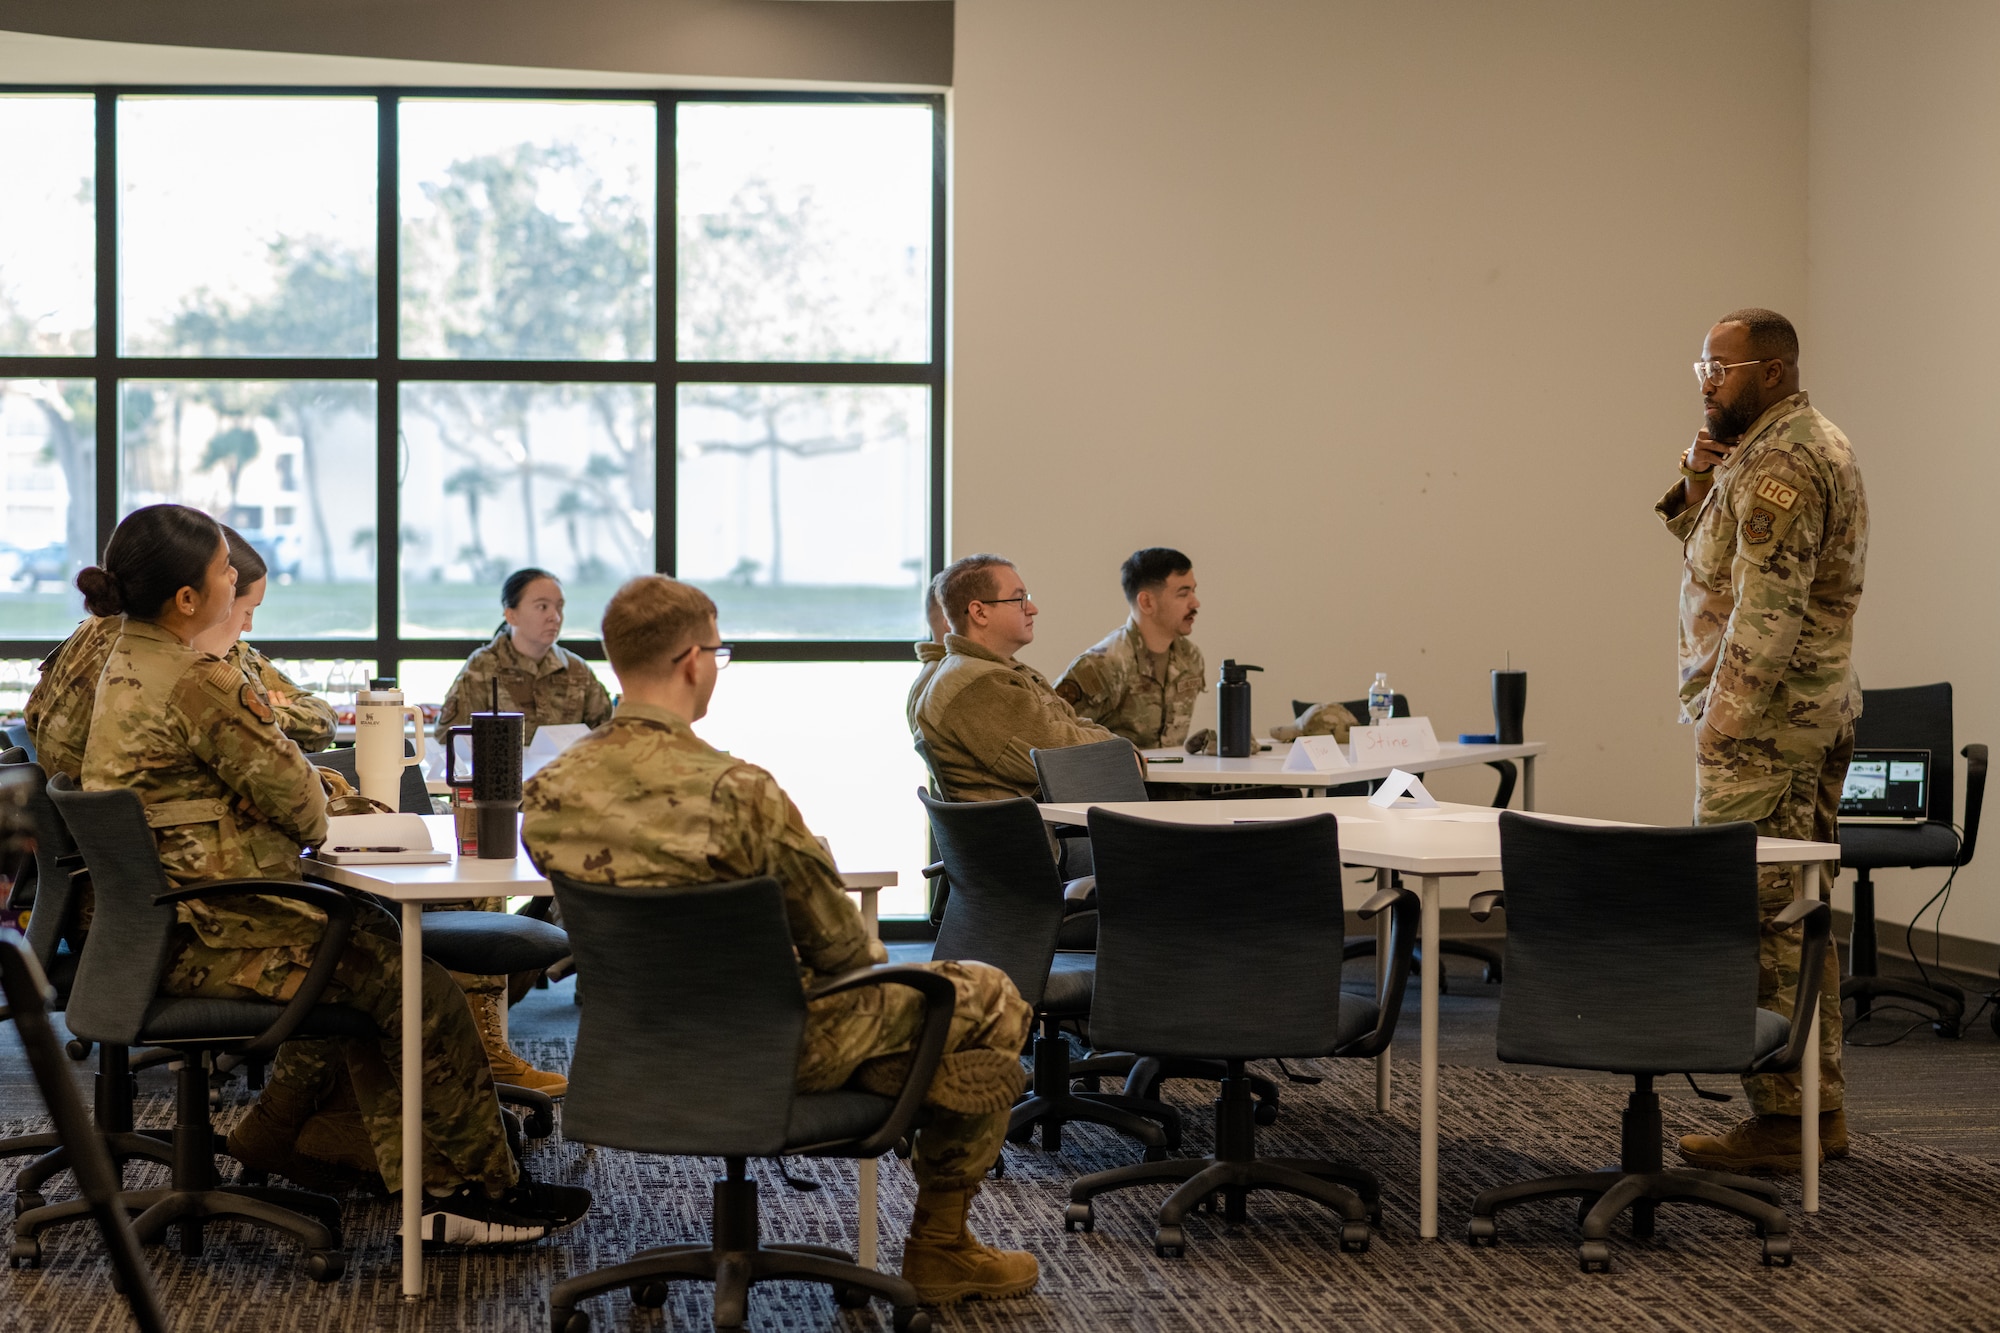 The course focused on four main topics of interest: understanding Generation Z Airmen, the difference between good and toxic leadership, subconscious bias and emotional intelligence. (U.S. Air Force photo by Airman 1st Class Zachary Foster)